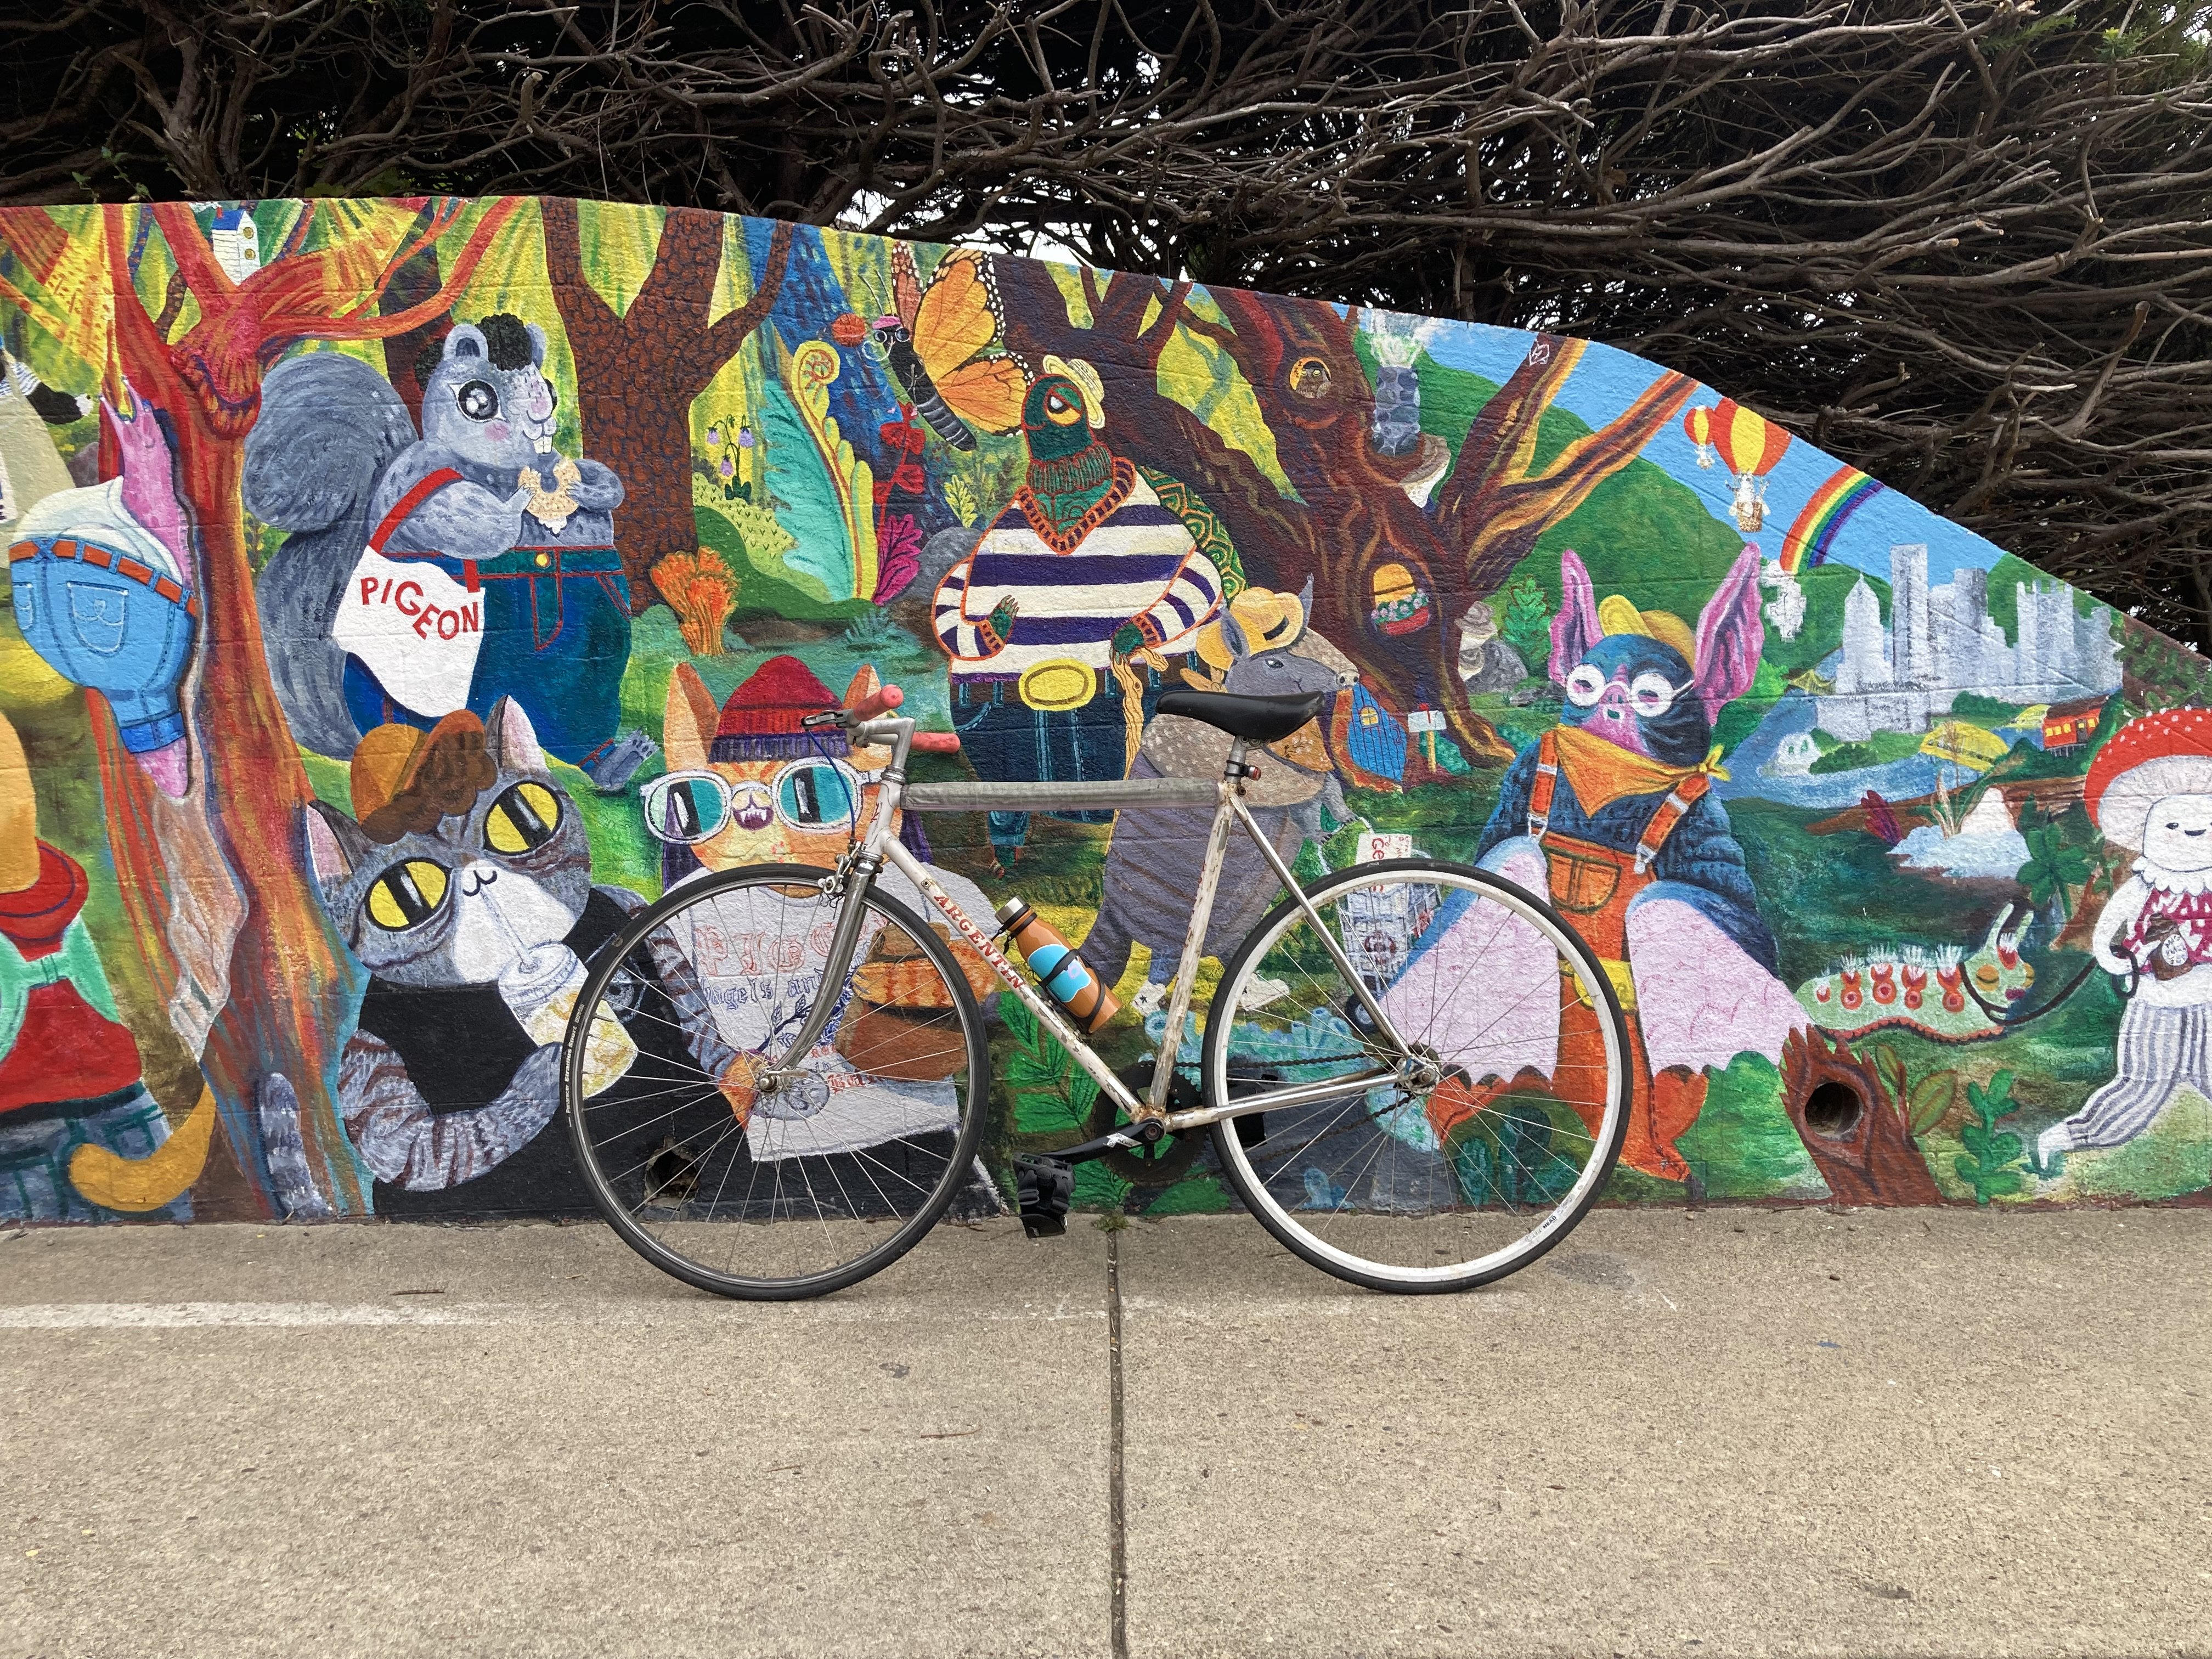 A fixed gear bicycle leaning against a colorful mural